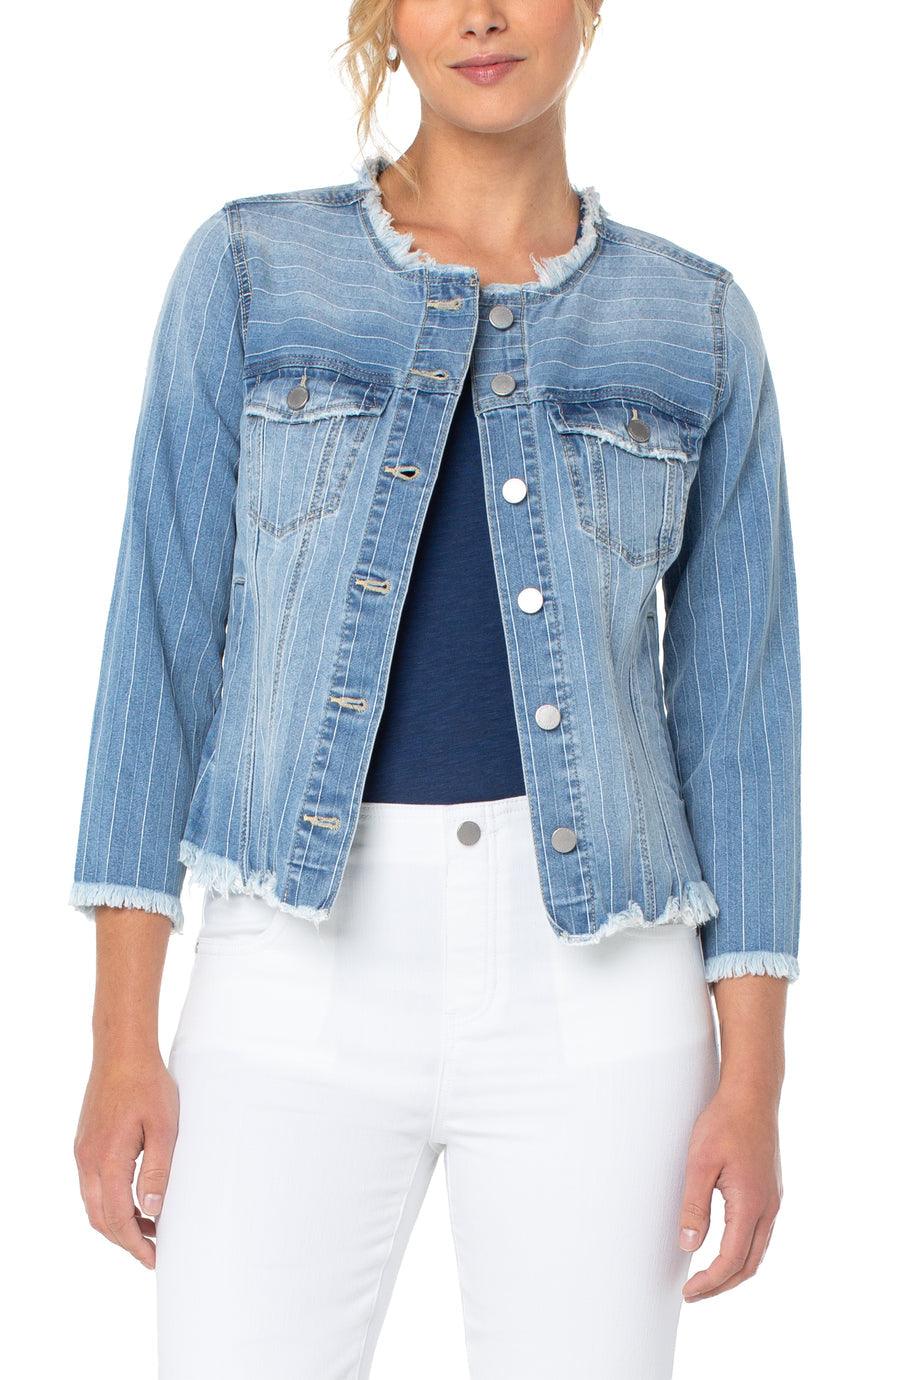 Liverpool Classic Jean Jacket with Fray Hem - Strawberry Moon Boutique